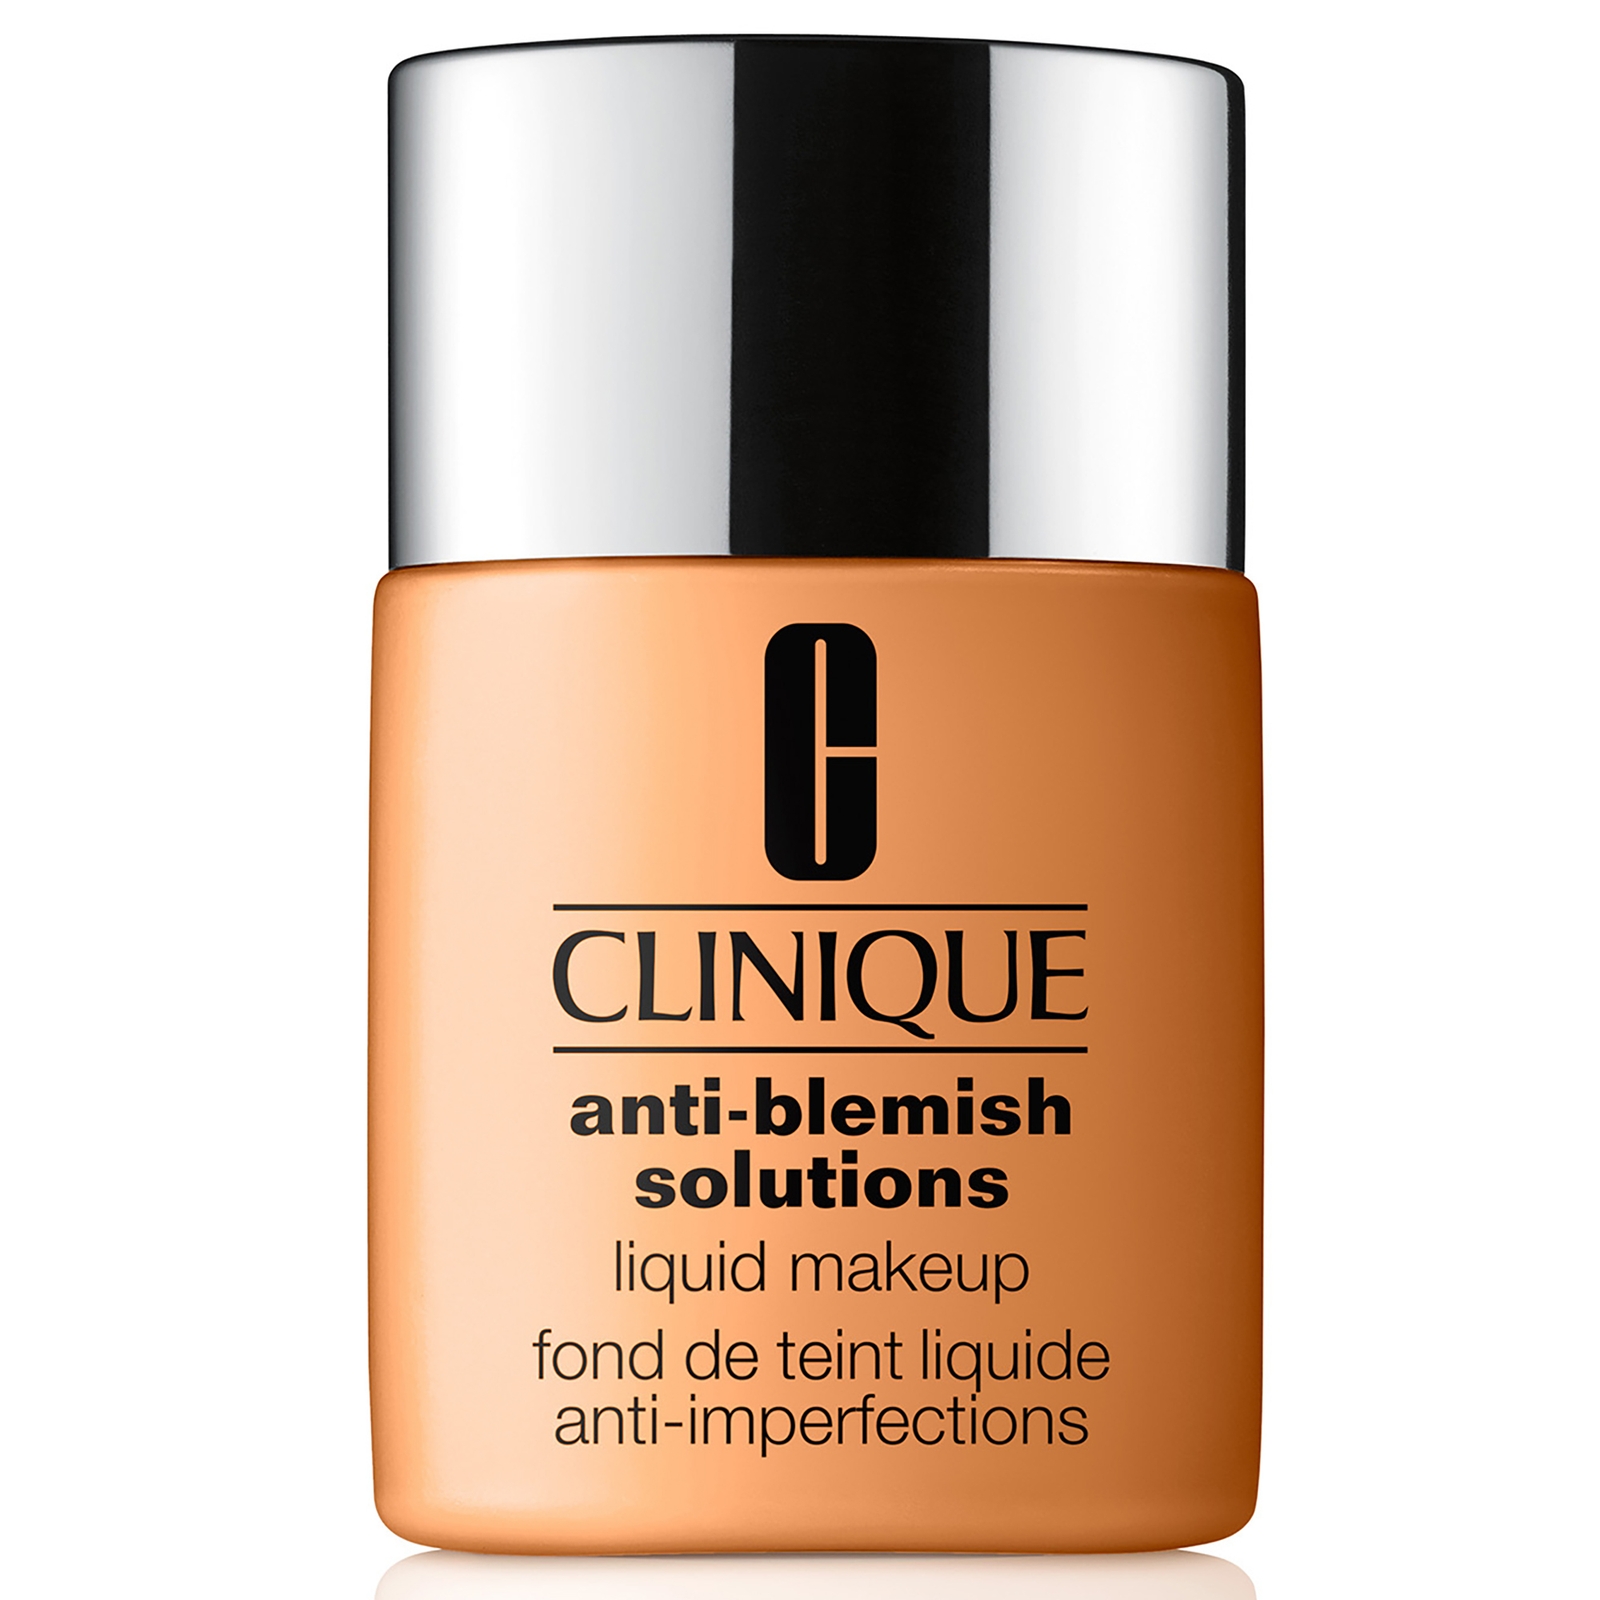 Clinique Anti-Blemish Solutions Liquid Makeup with Salicylic Acid 30ml (Various Shades) - WN 56 Cash